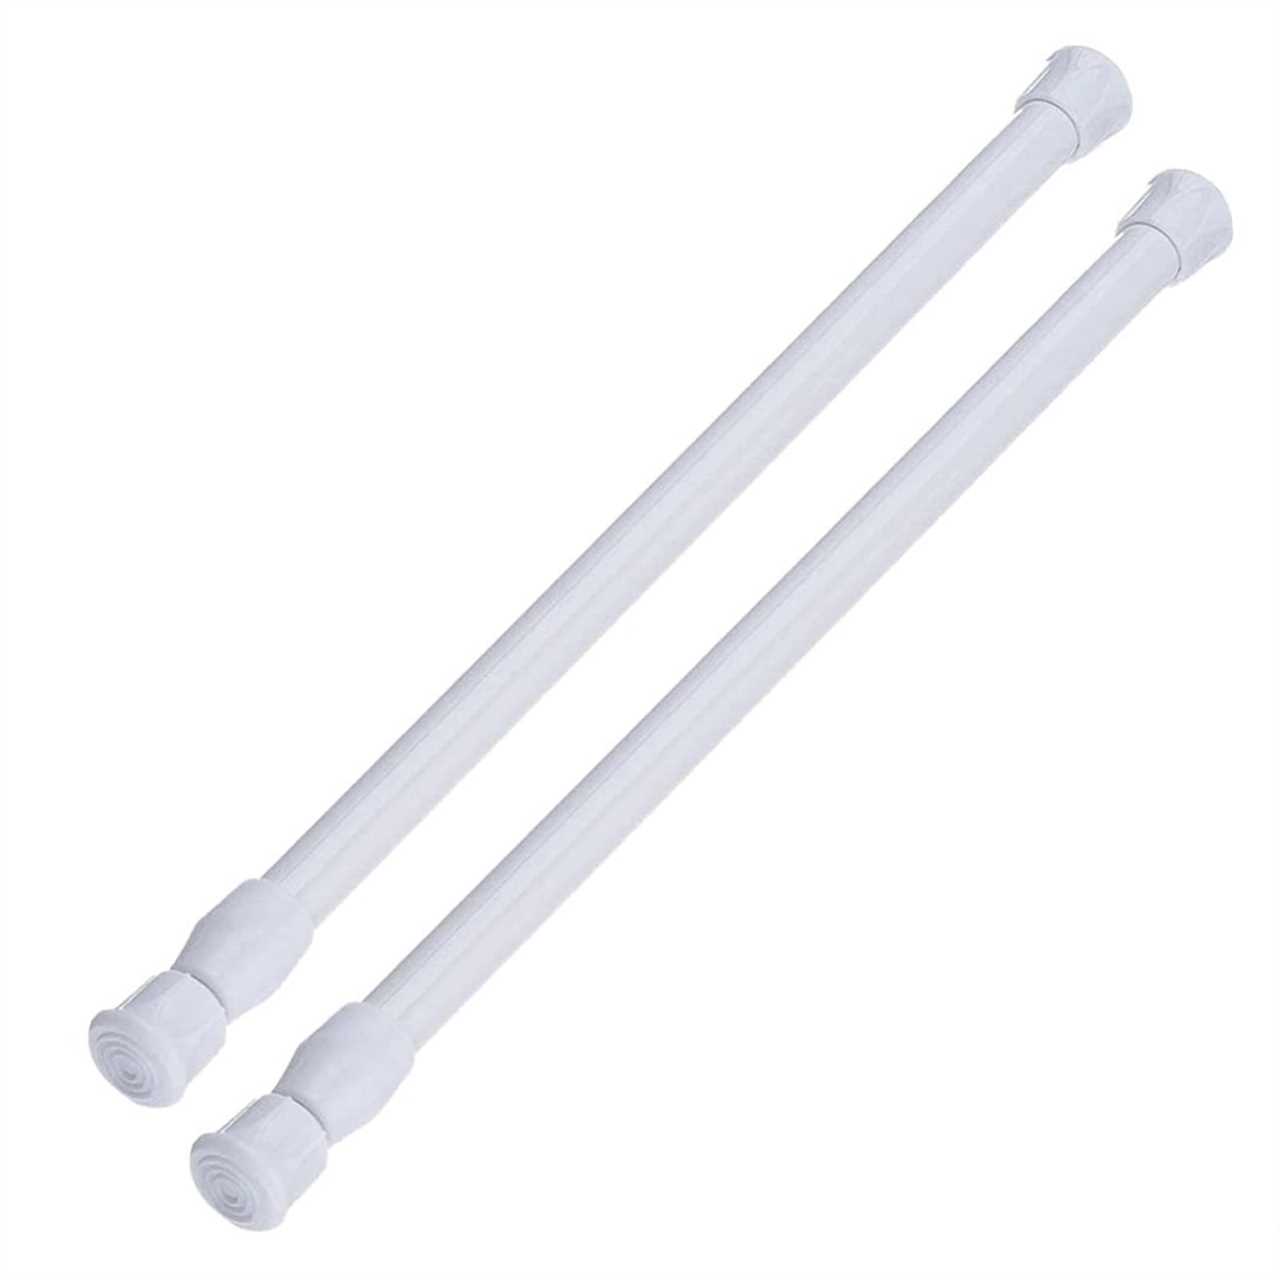 Twist and lock tension rods